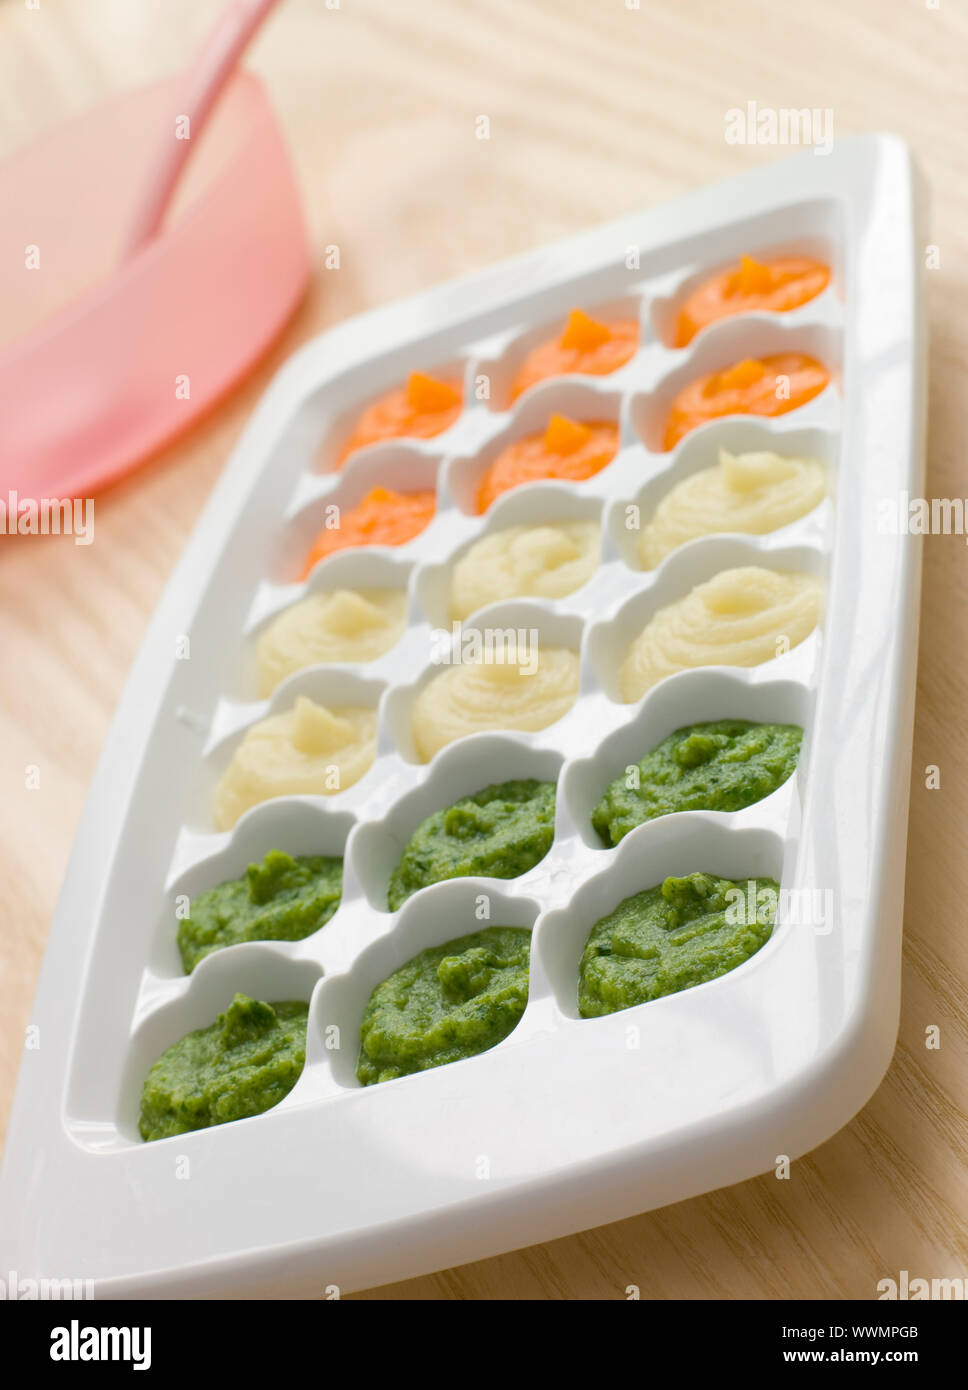 Pureed Baby Food in a Ice Cube Tray Stock Photo